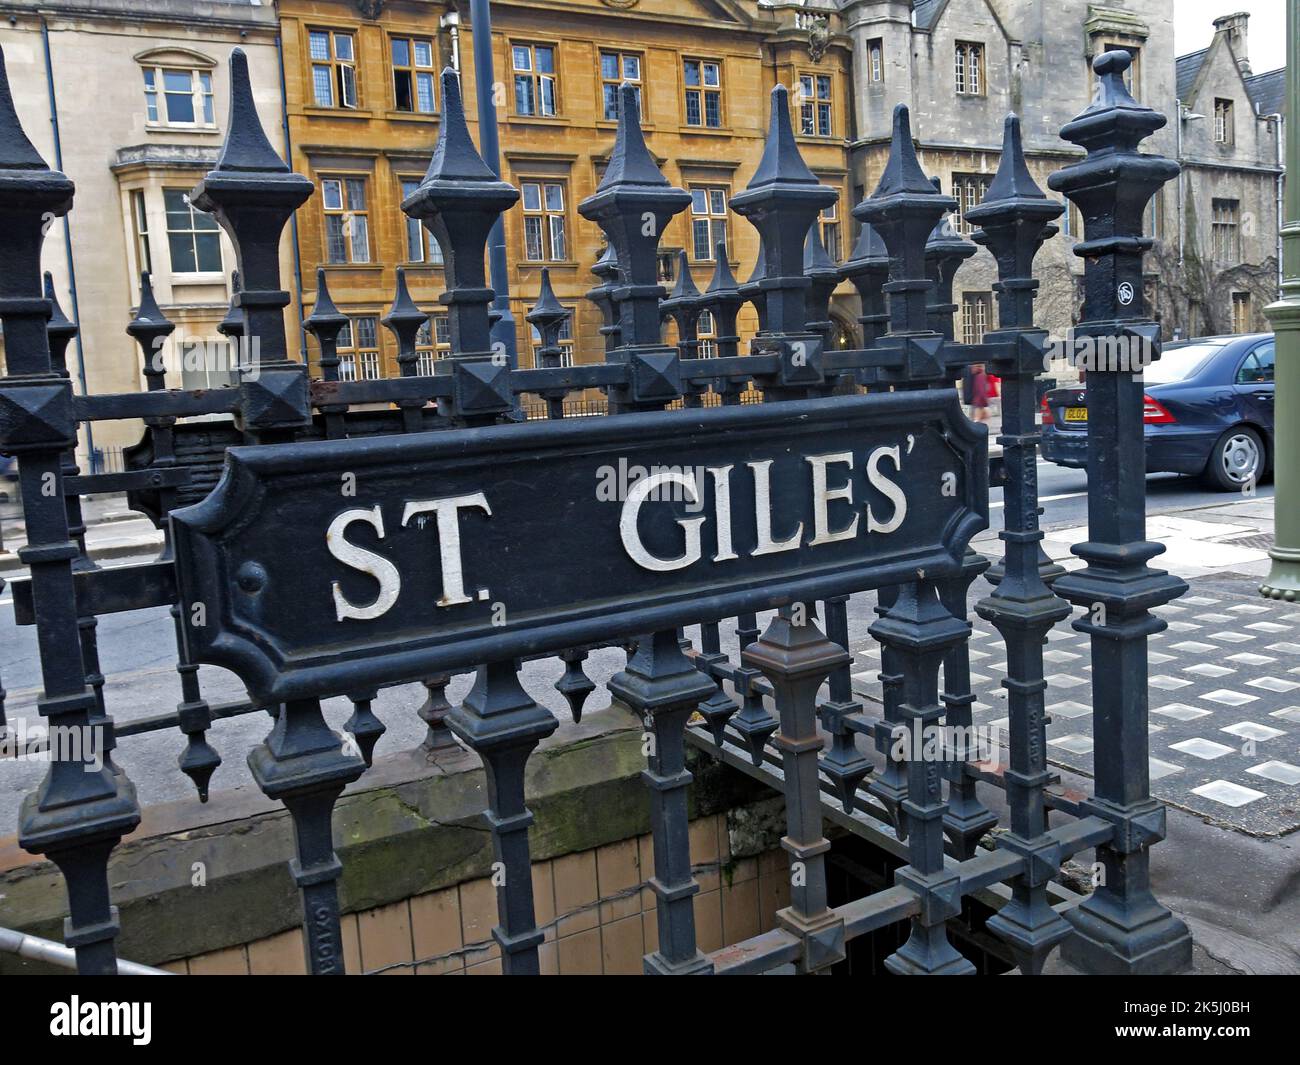 St Giles public comfornds, Oxford, Oxfordshire, Angleterre, Royaume-Uni Banque D'Images